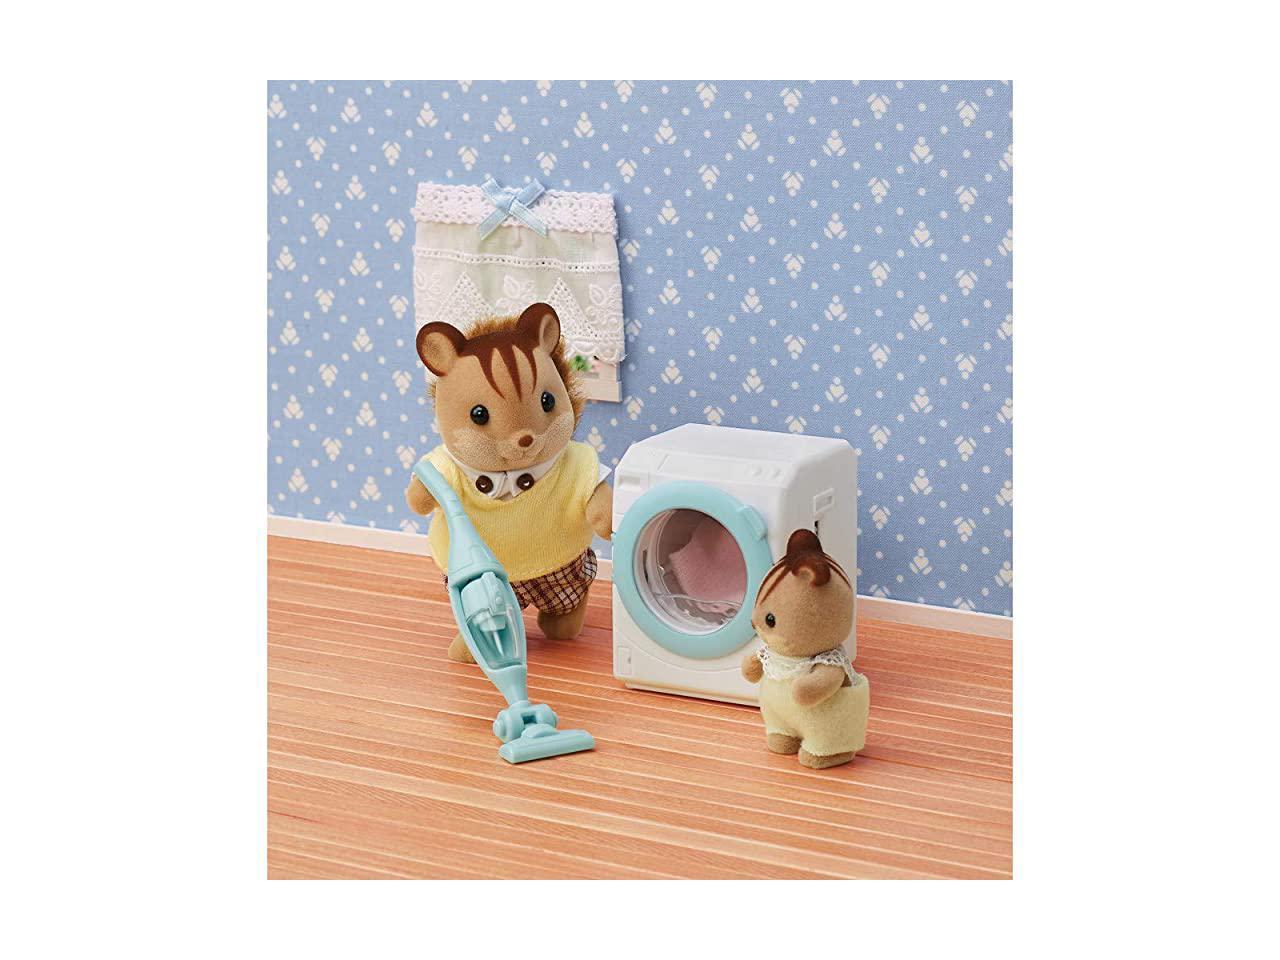 Sylvanian Families Laundry & Vacuum Cleaner Furniture Set 5445 Role Play Toy 3+ 